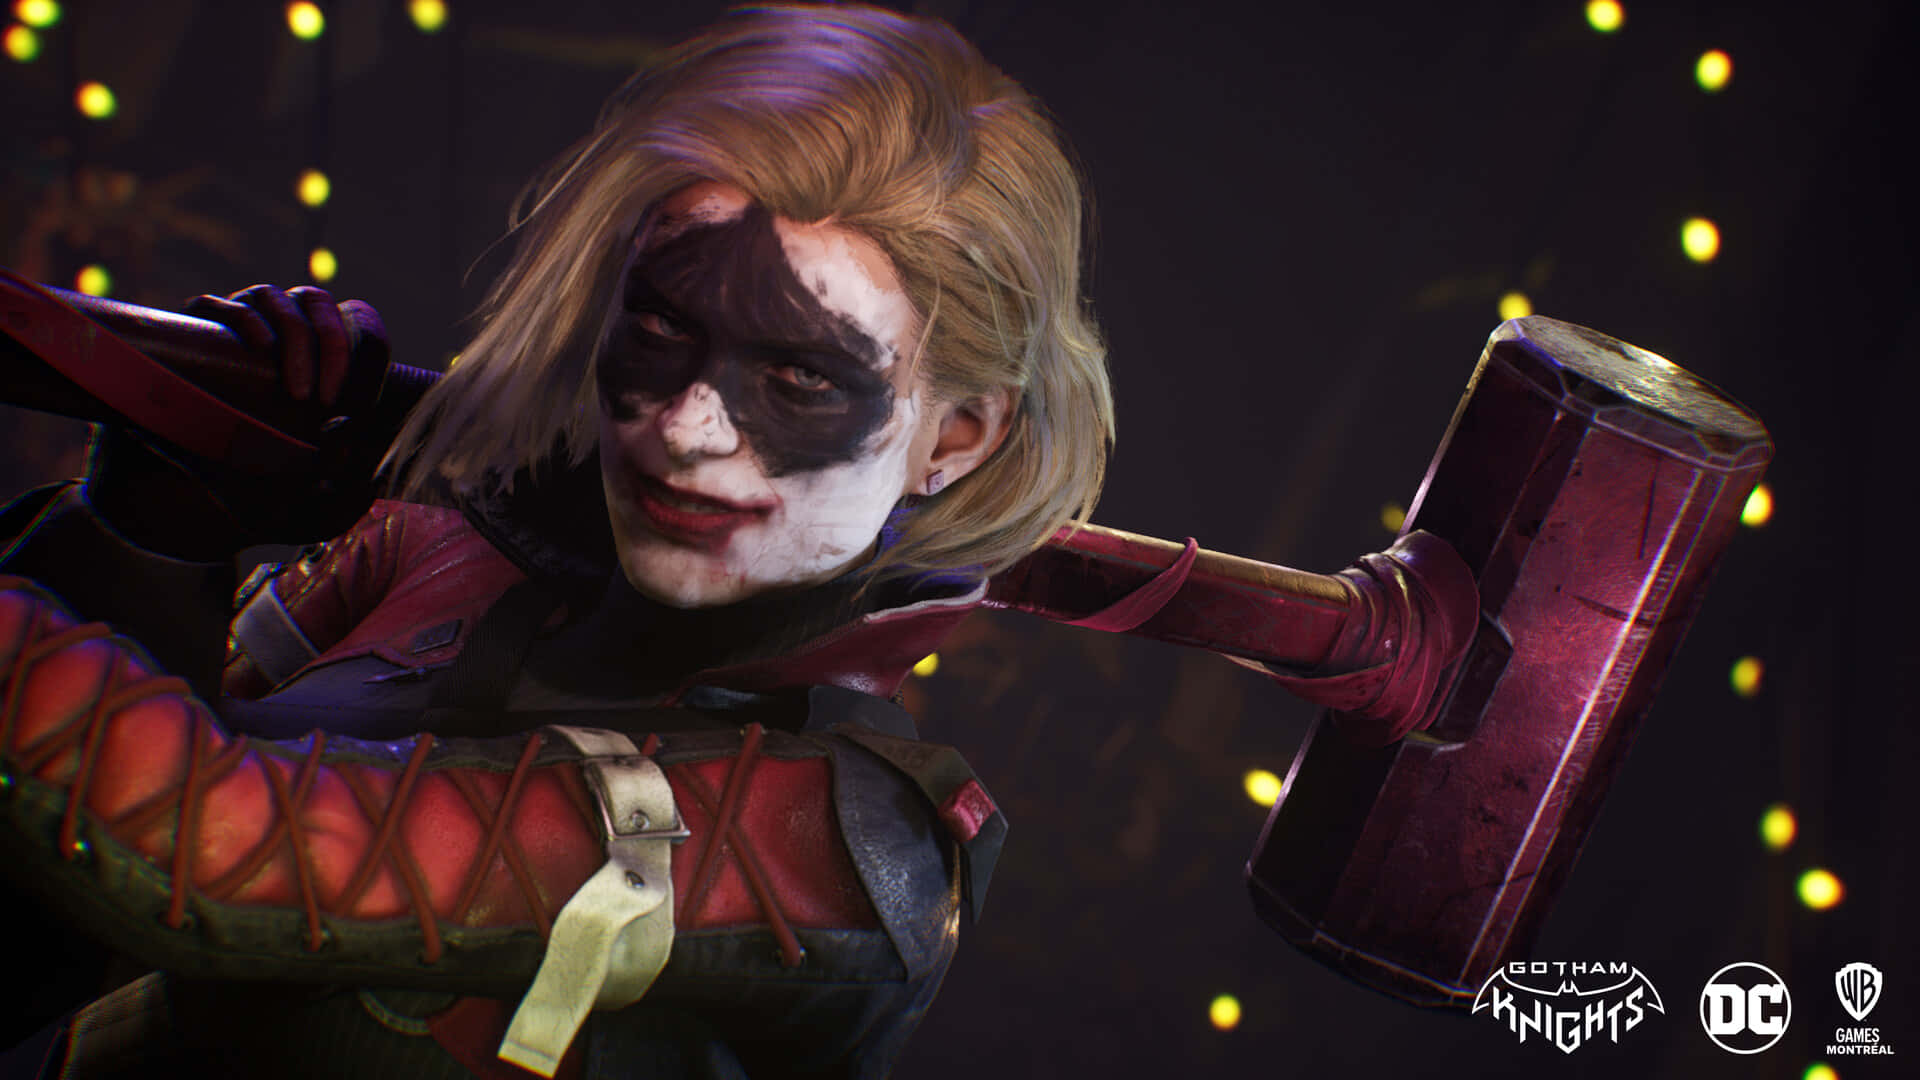 Harley Quinn wielding her iconic hammer in a powerful pose Wallpaper